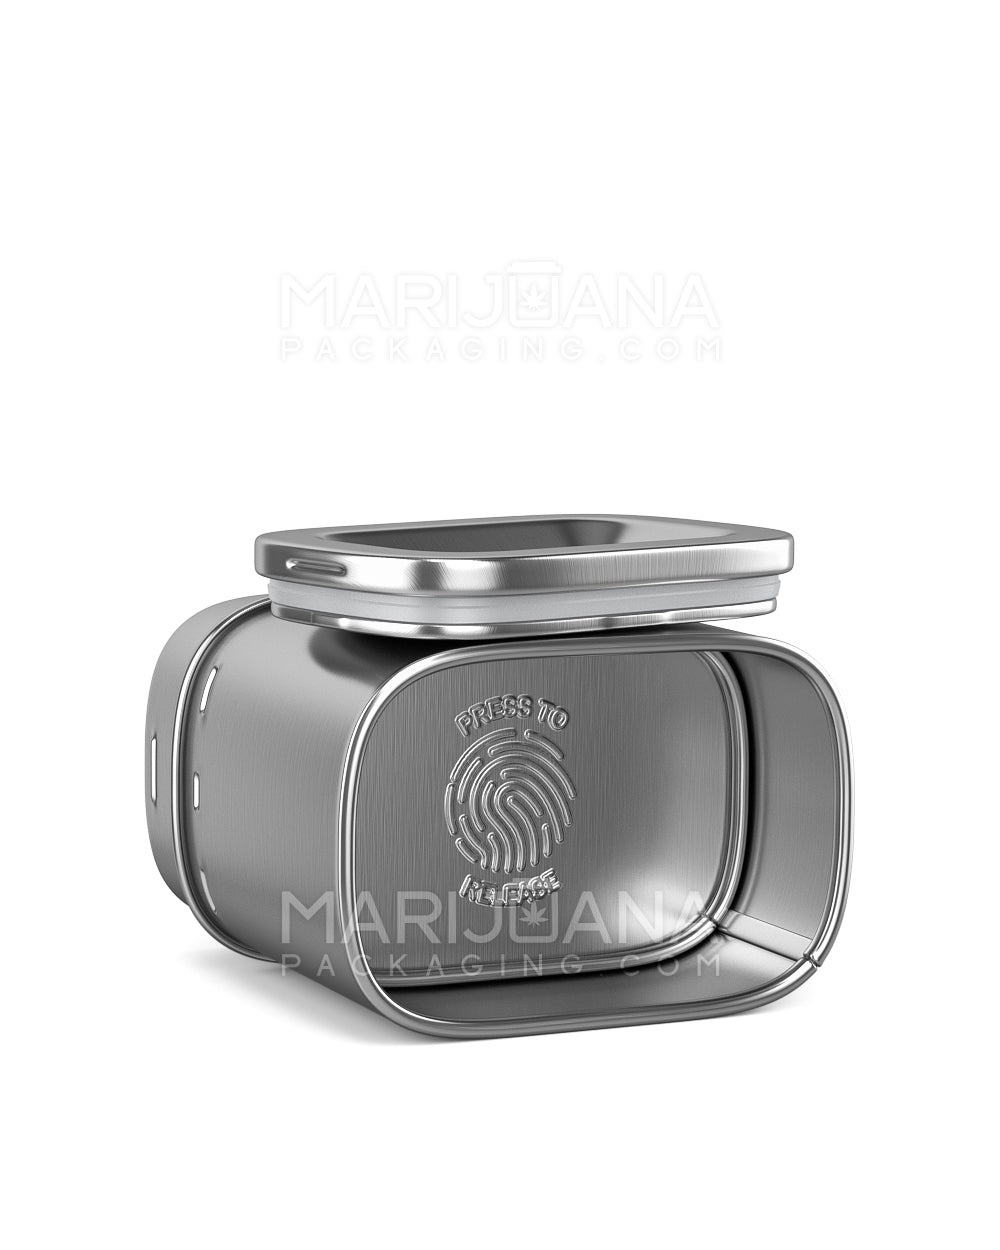 Child Resistant & Sustainable | 100% Recyclable PushTin Medium Container | 2oz - Silver Tin - 200 Count - 7